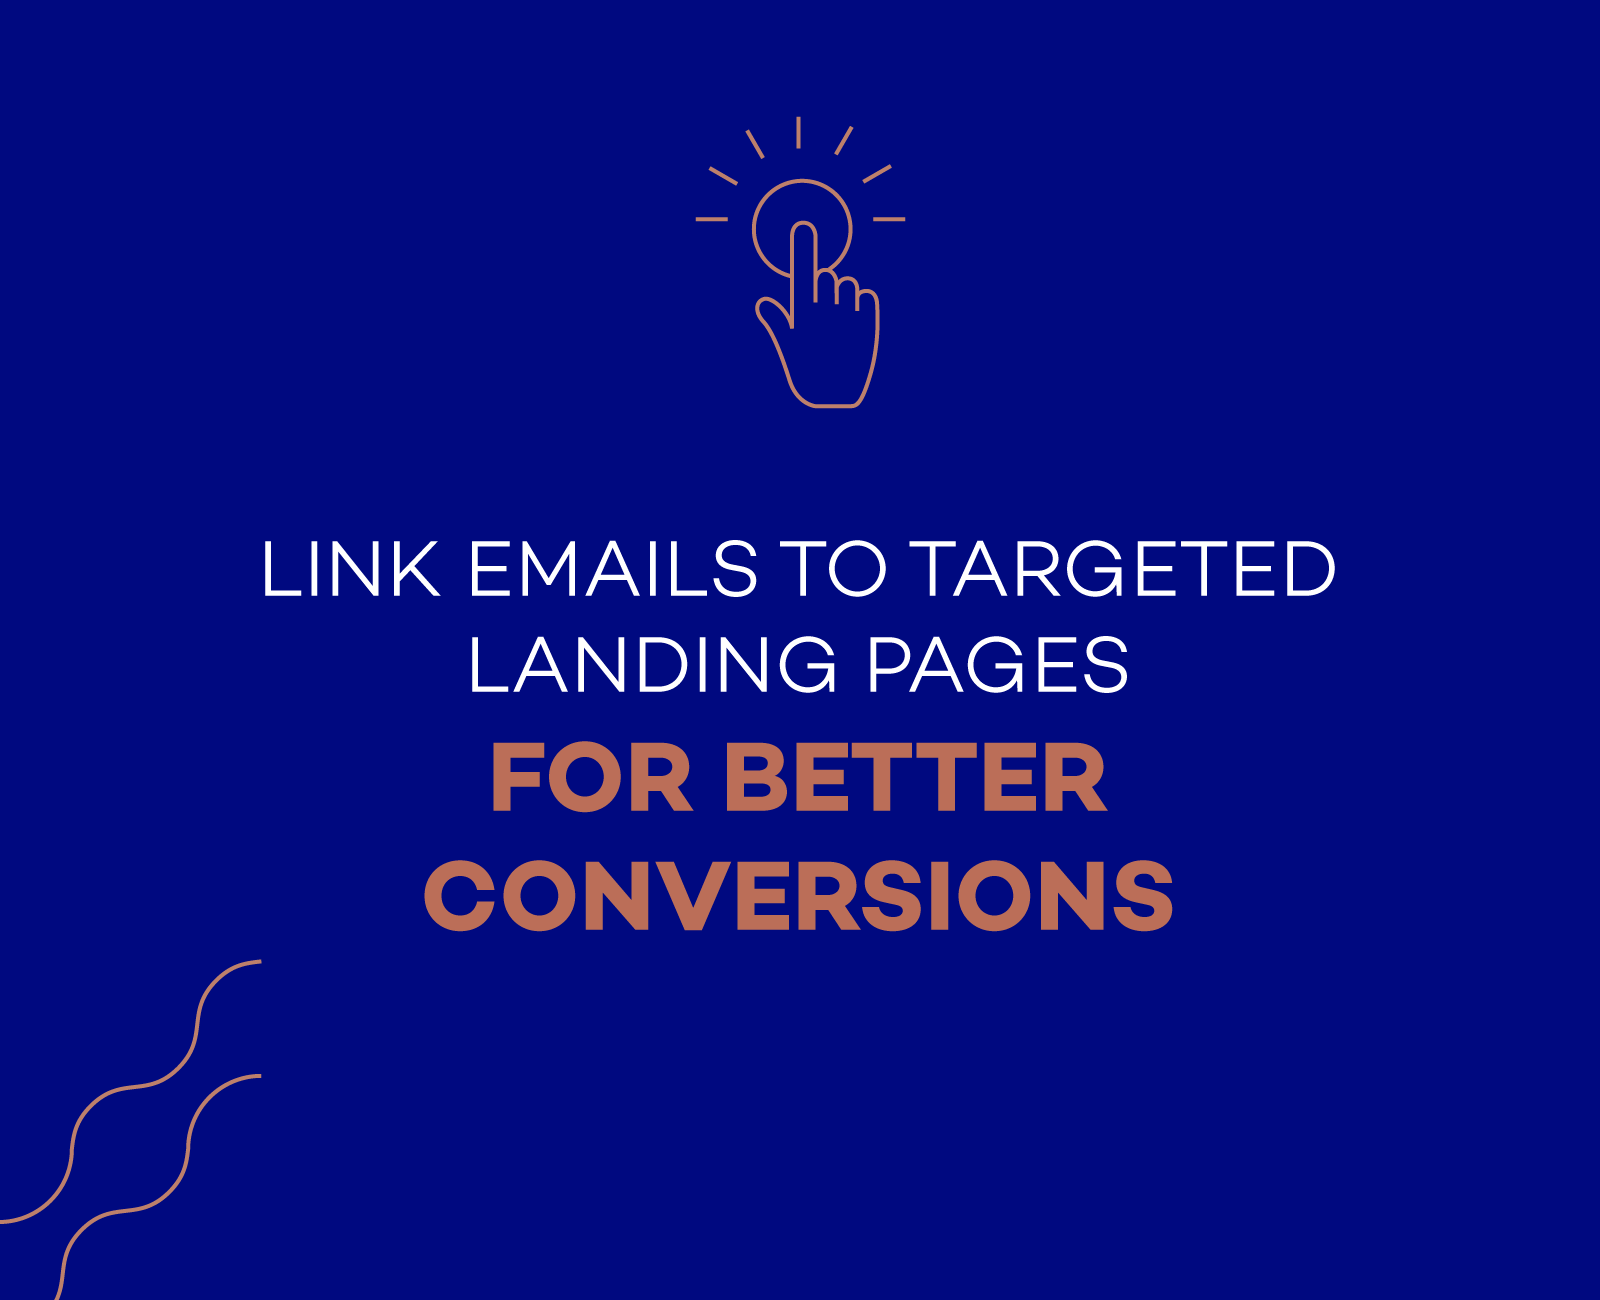 Link emails to targeted landing pages for better conversions